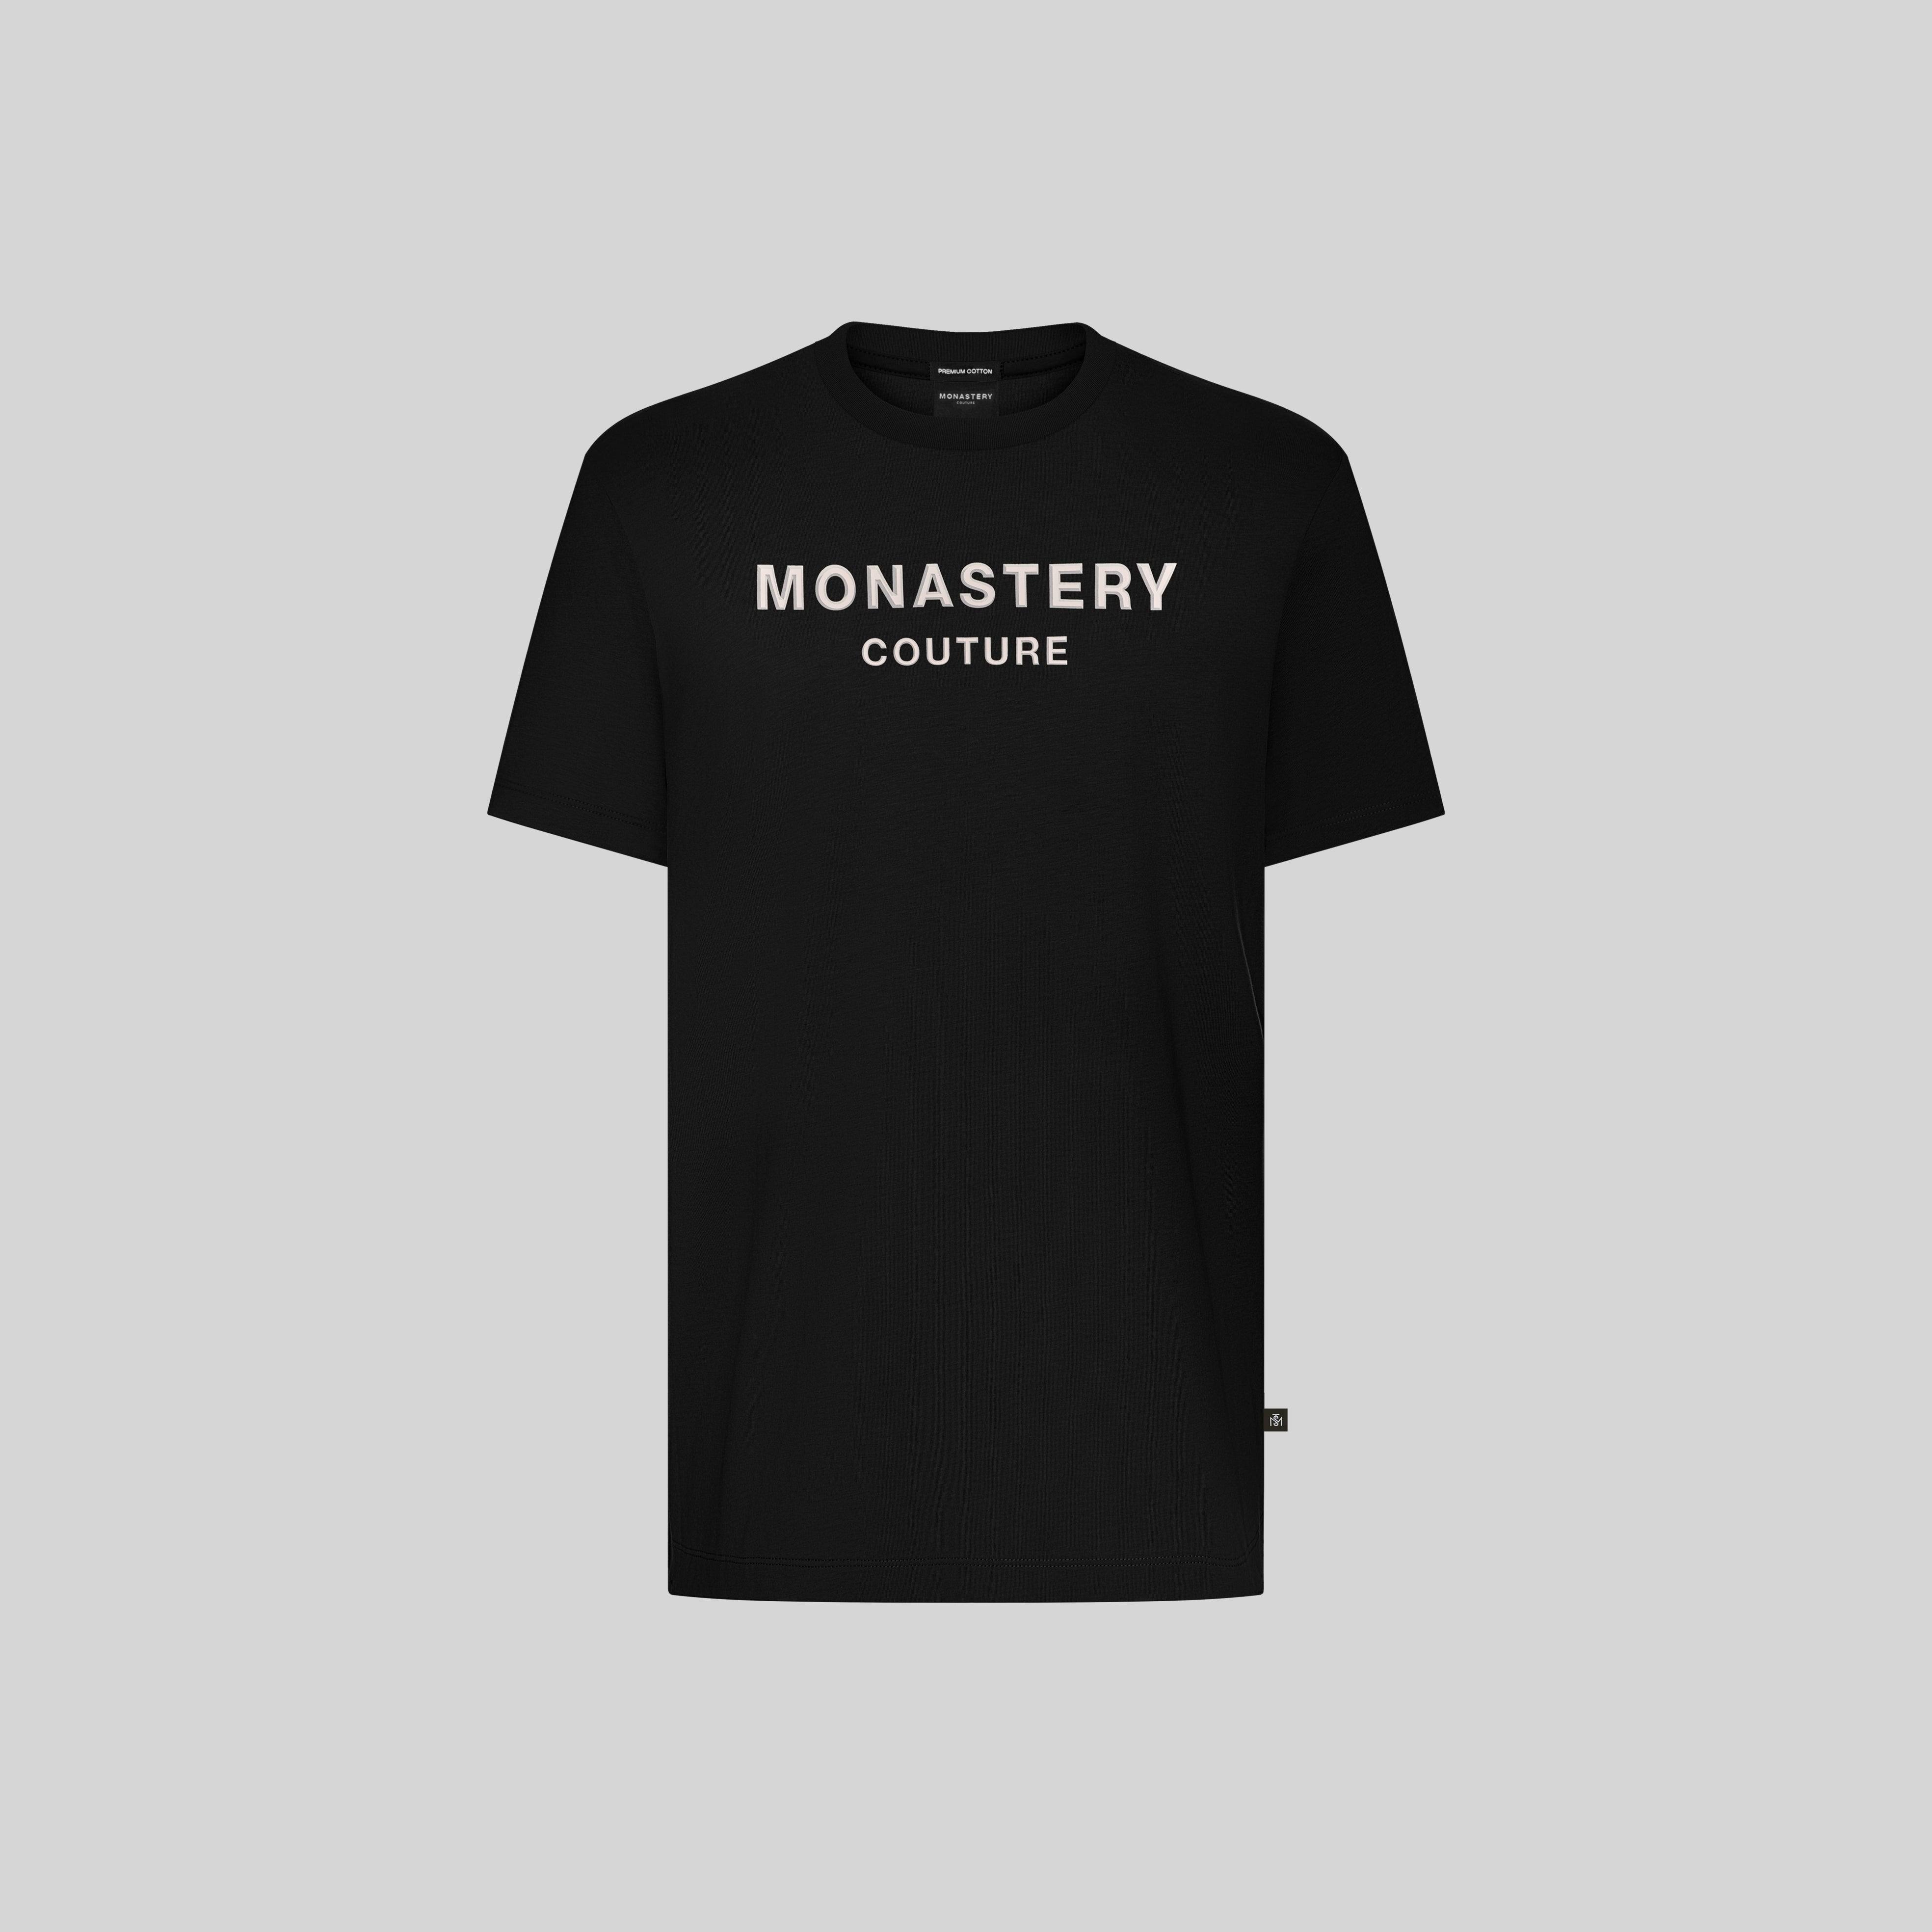 SULTES BLACK T-SHIRT | Monastery Couture